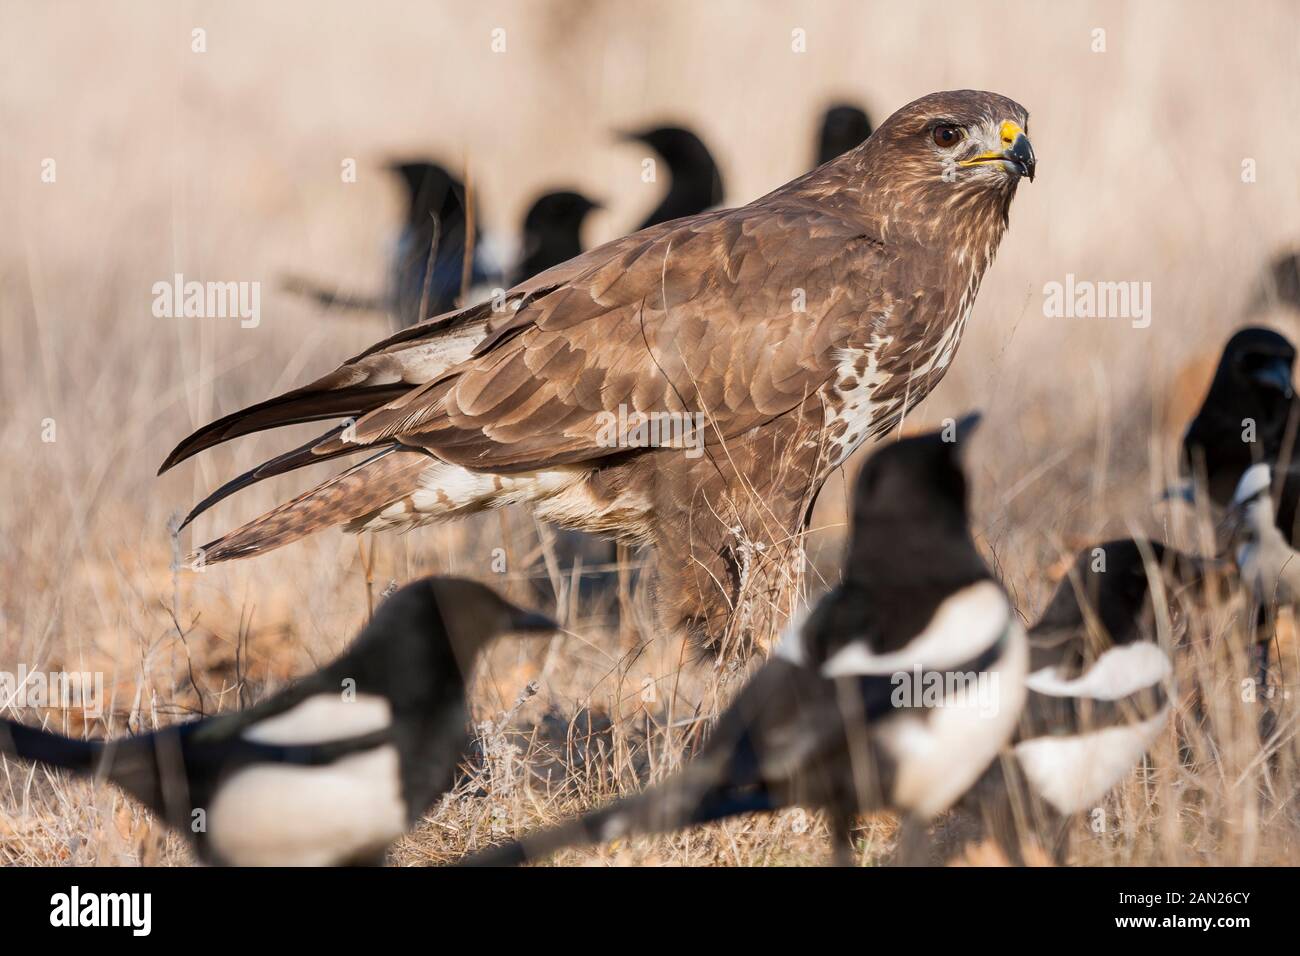 Common mousetrap, Buteo buteo, feeding on its prey on the ground between magpies Stock Photo